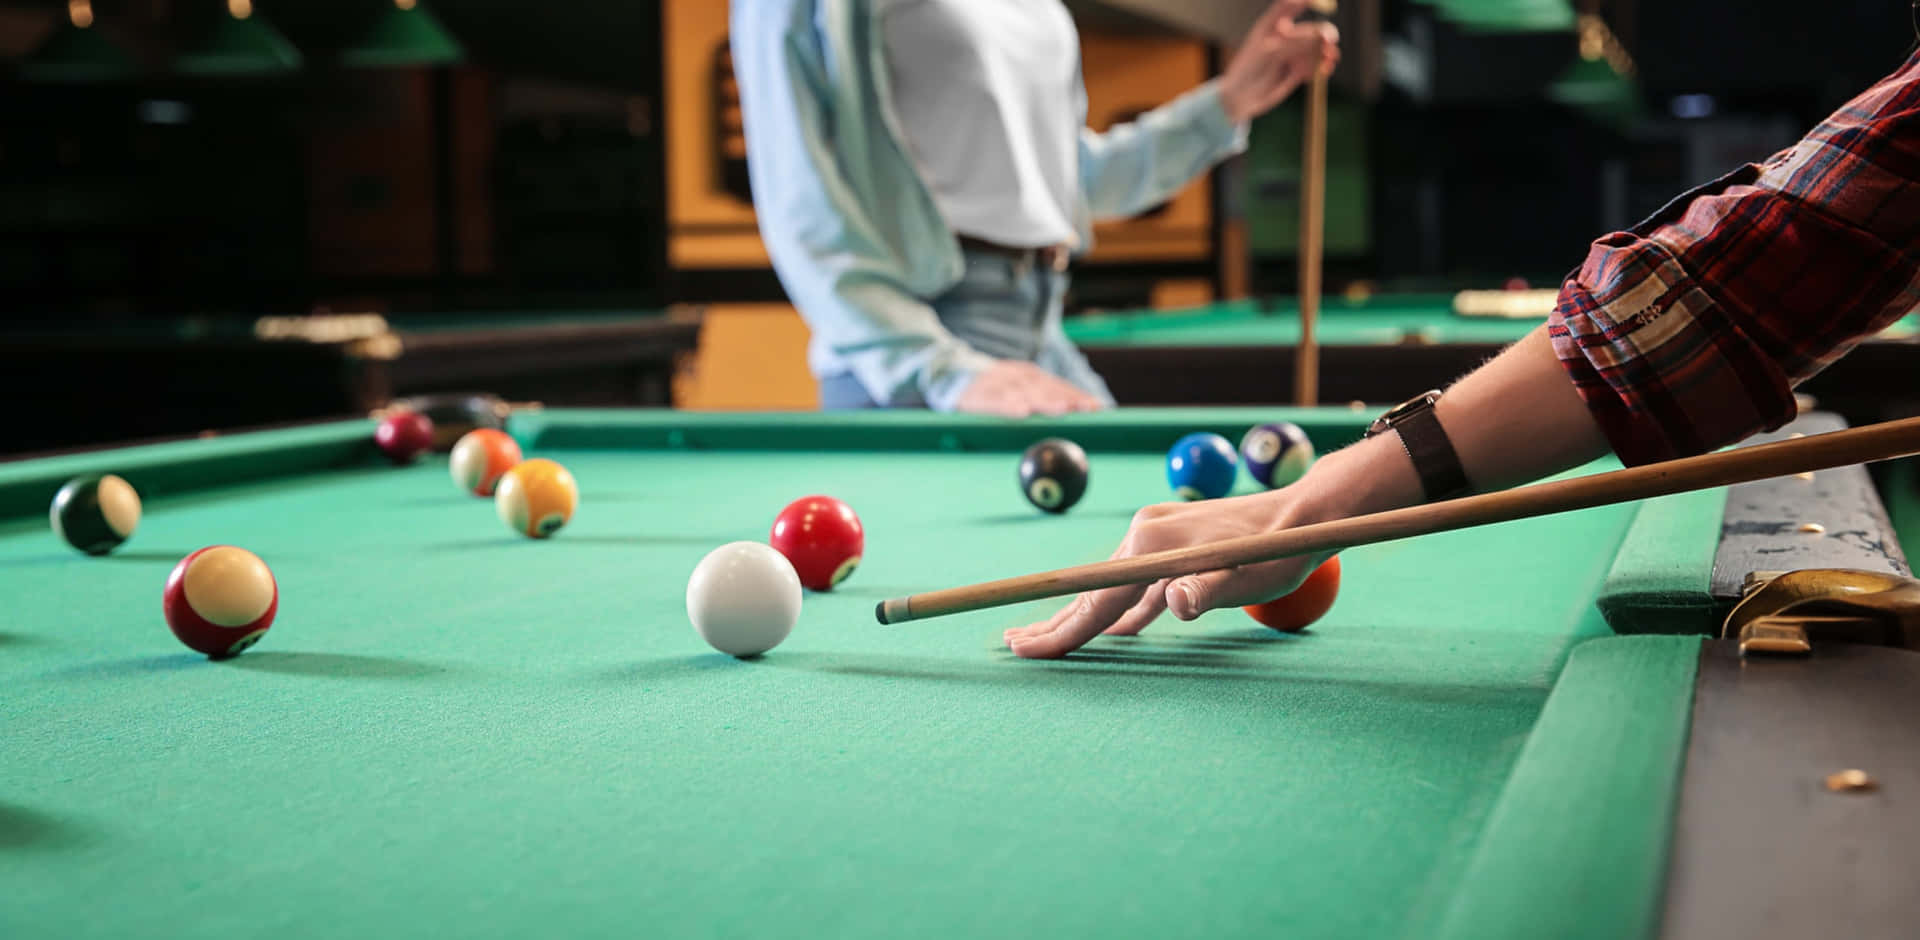 A Person Is Playing Billiards With A Ball